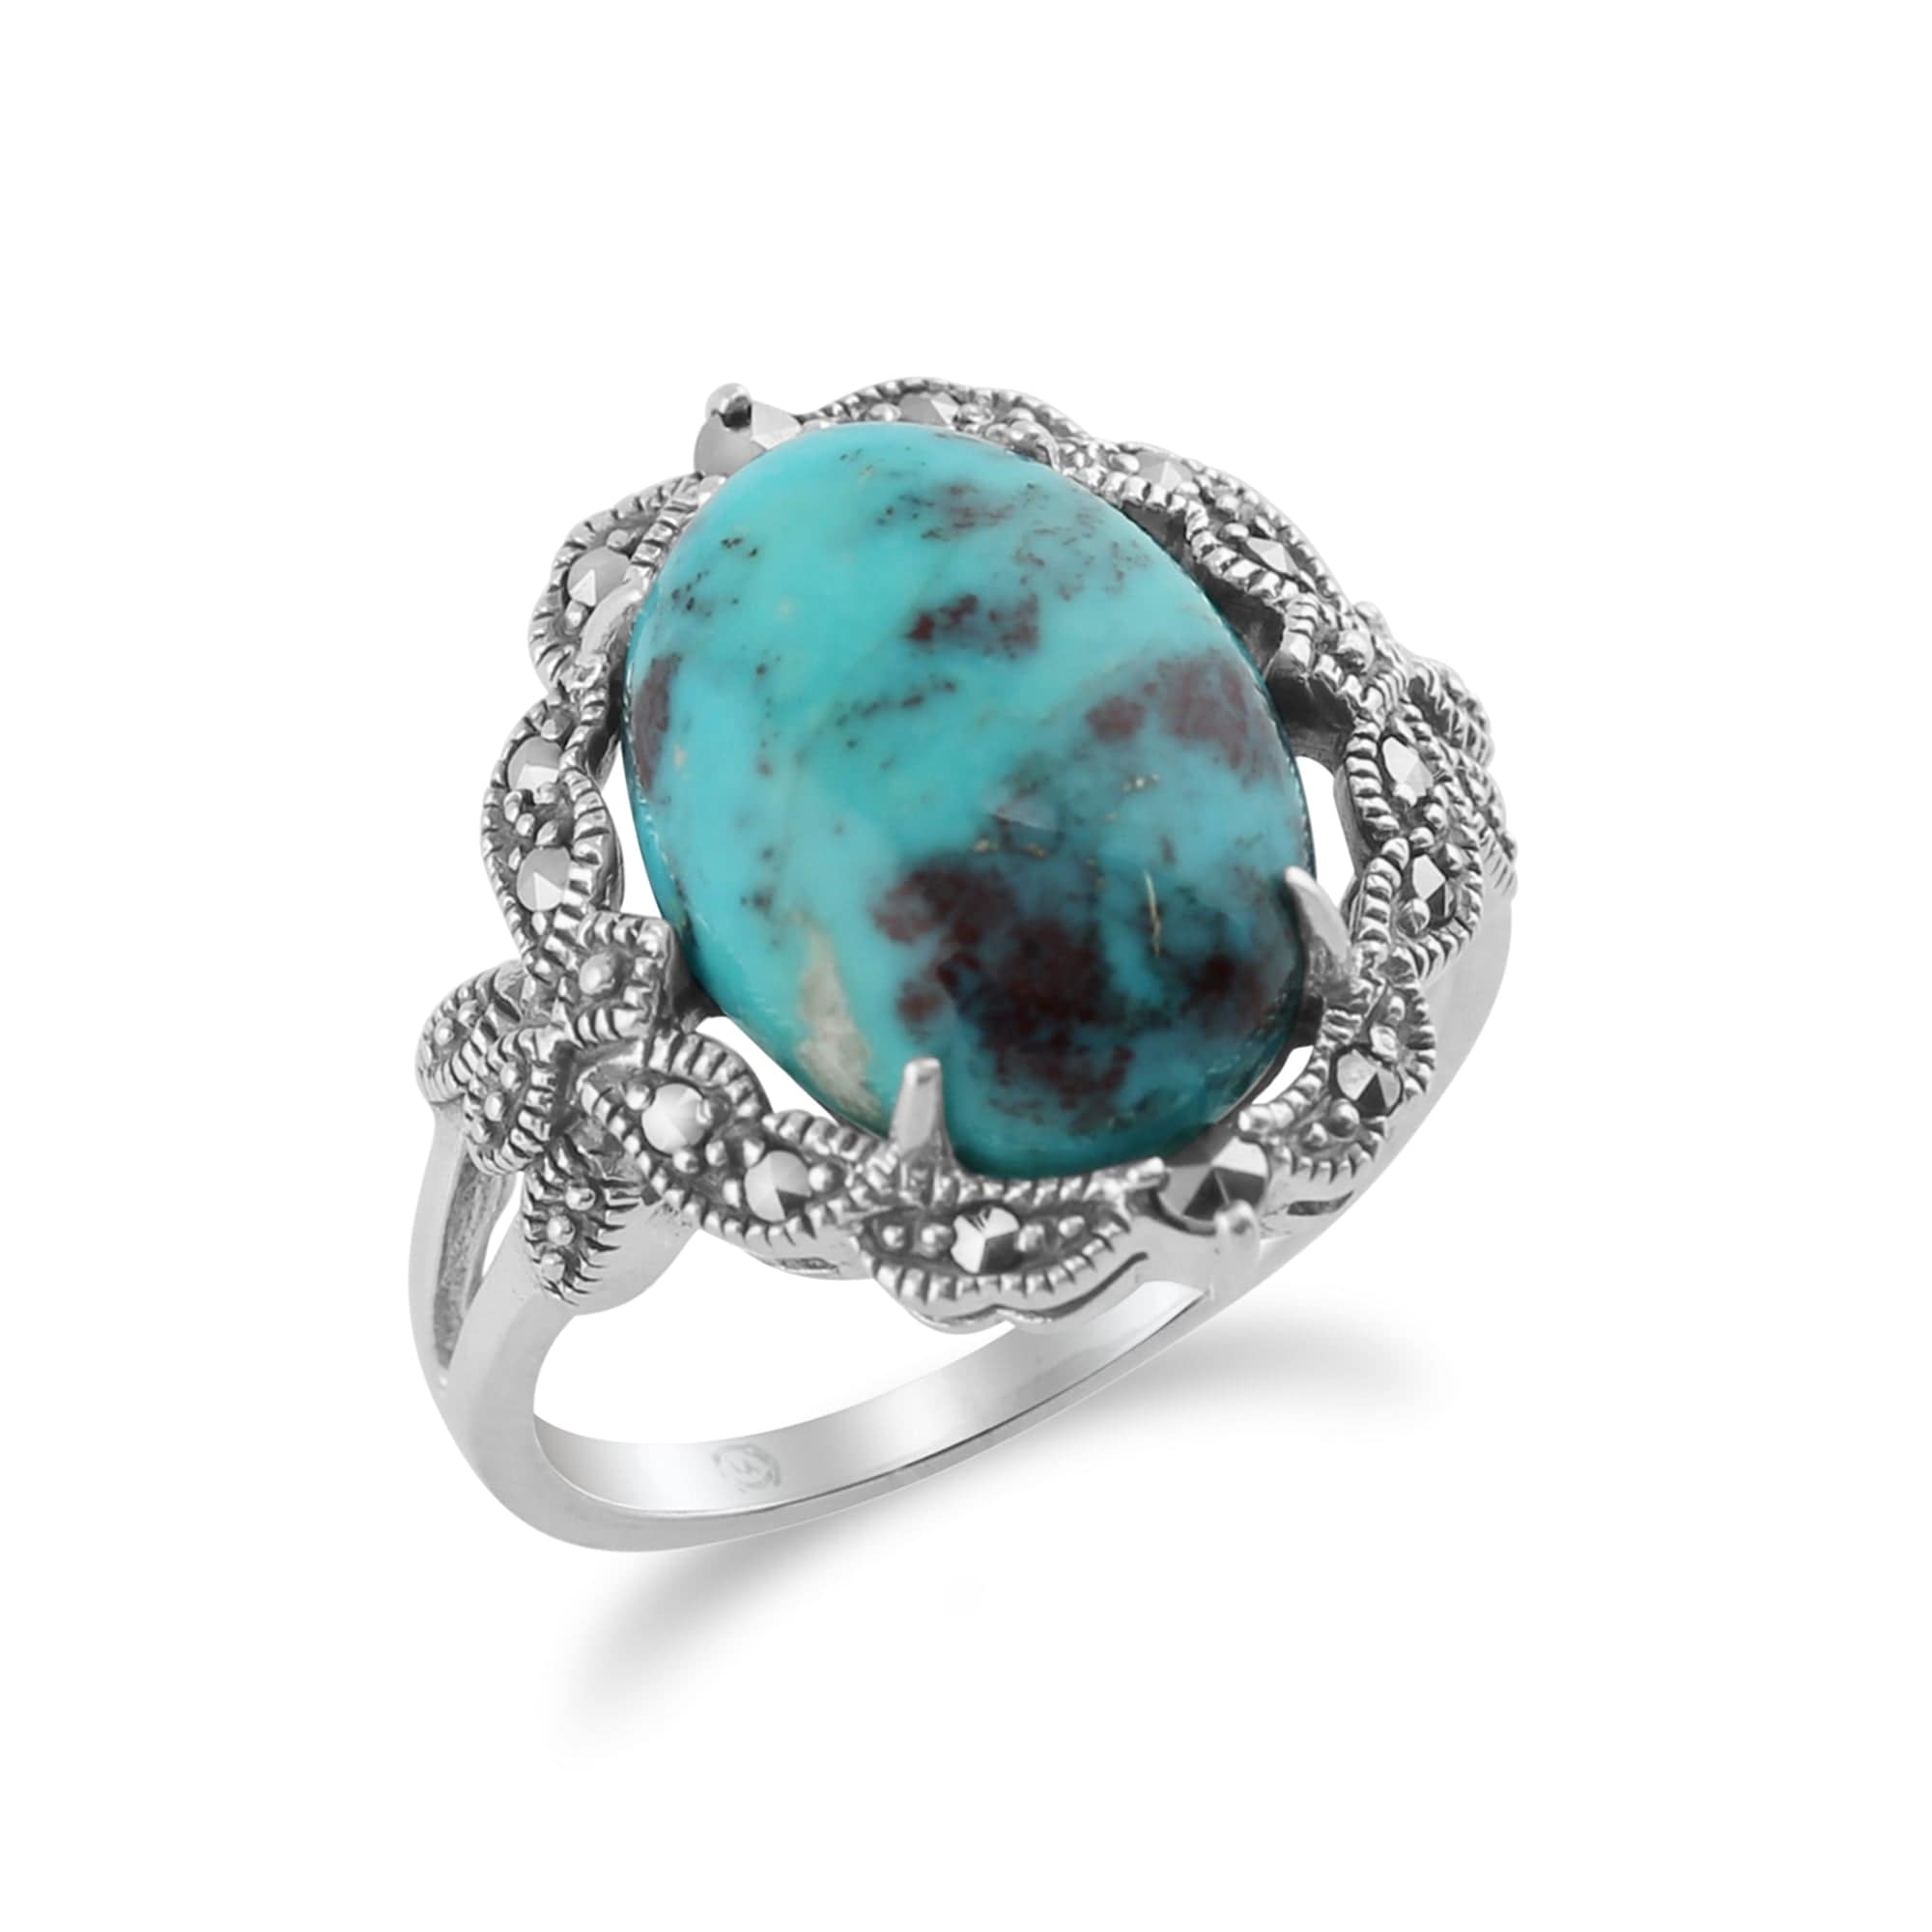 214R479205925 Art Nouveau Style Turquoise & Marcasite Cocktail Ring In Sterling Silver 2